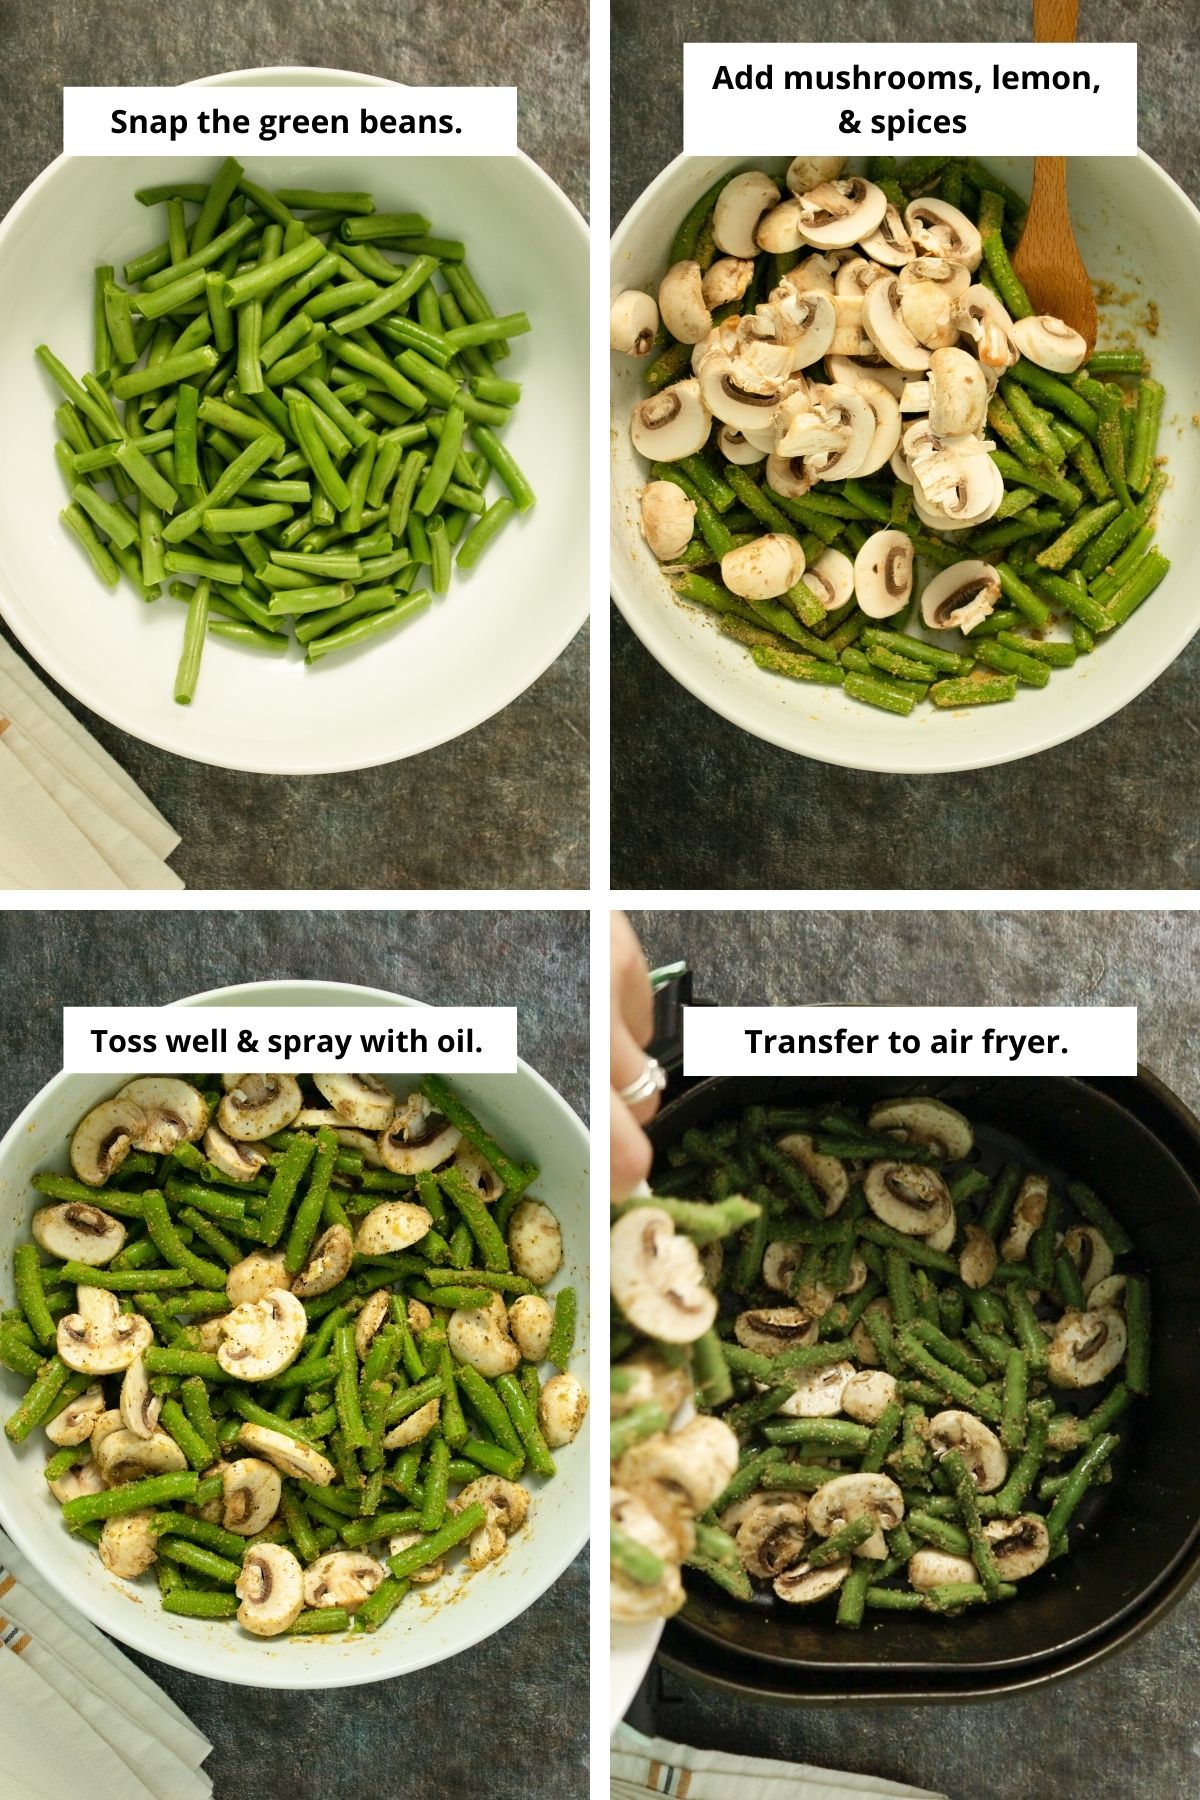 image collage showing trimmed green beans, beans before and after tossing with mushrooms and spices, and transferring the mixture to the air fryer basket